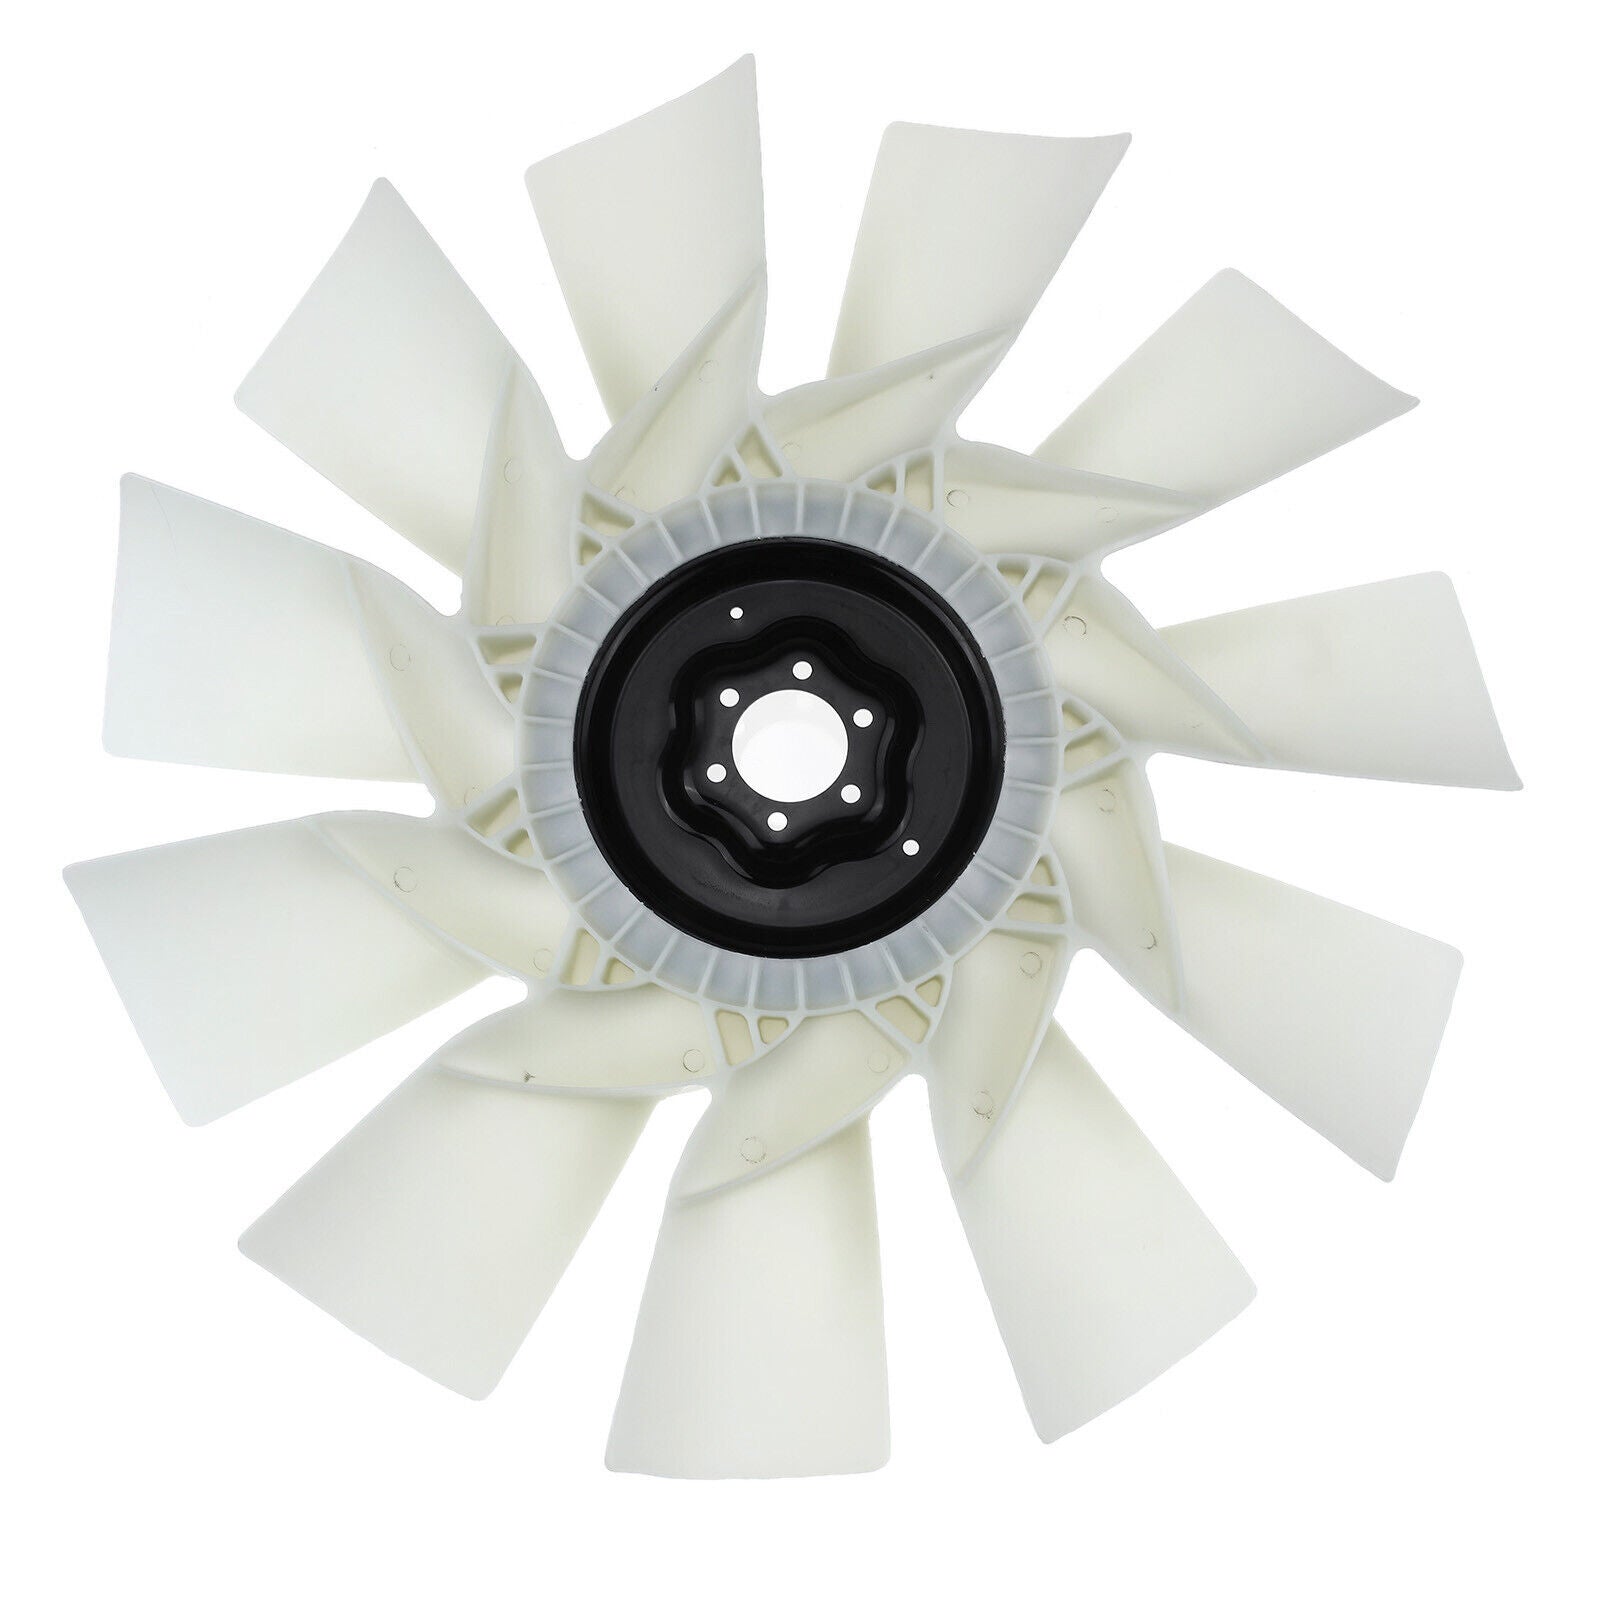 Engine Cooling Fan Blade for Volvo D13 with 11 Blades Black Front 4735-44510-01 For Volvo